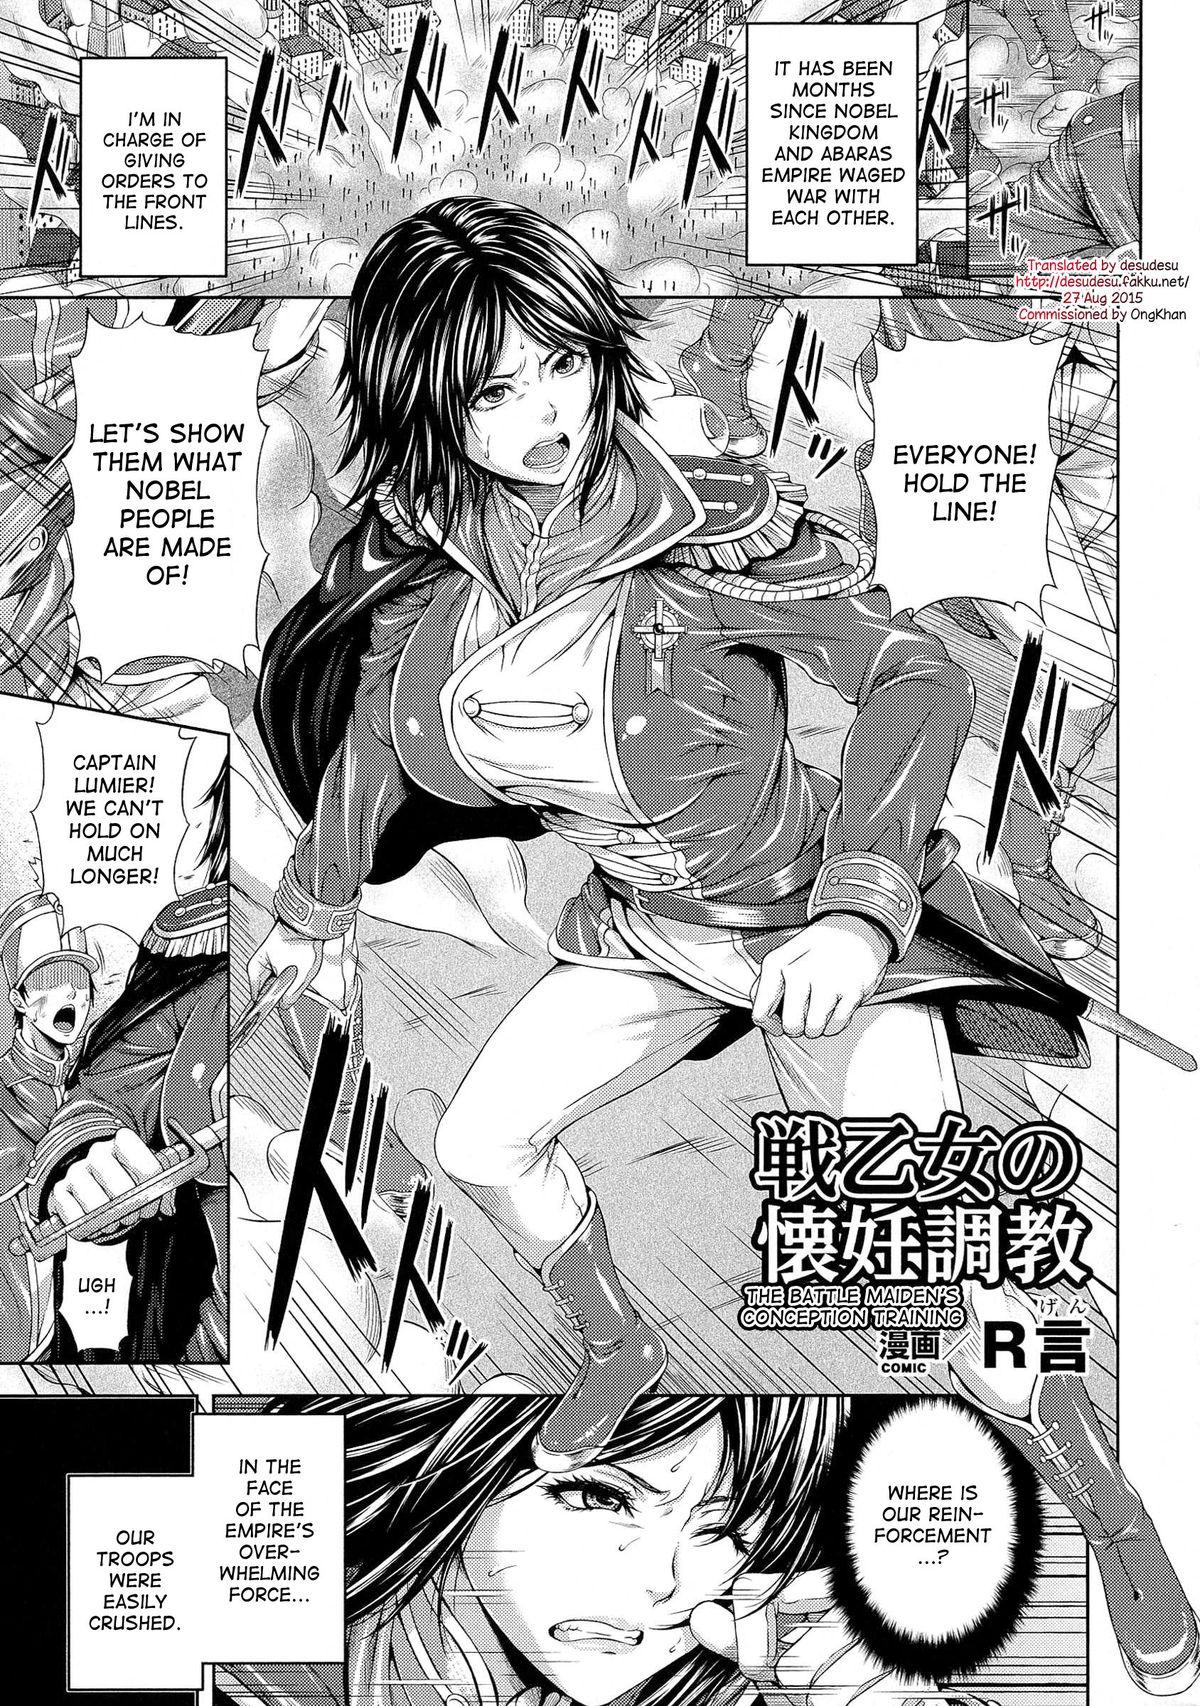 Married Ikusaotome no Kainin Choukyou | The Battle Maiden's Conception Training Boy Girl - Page 5